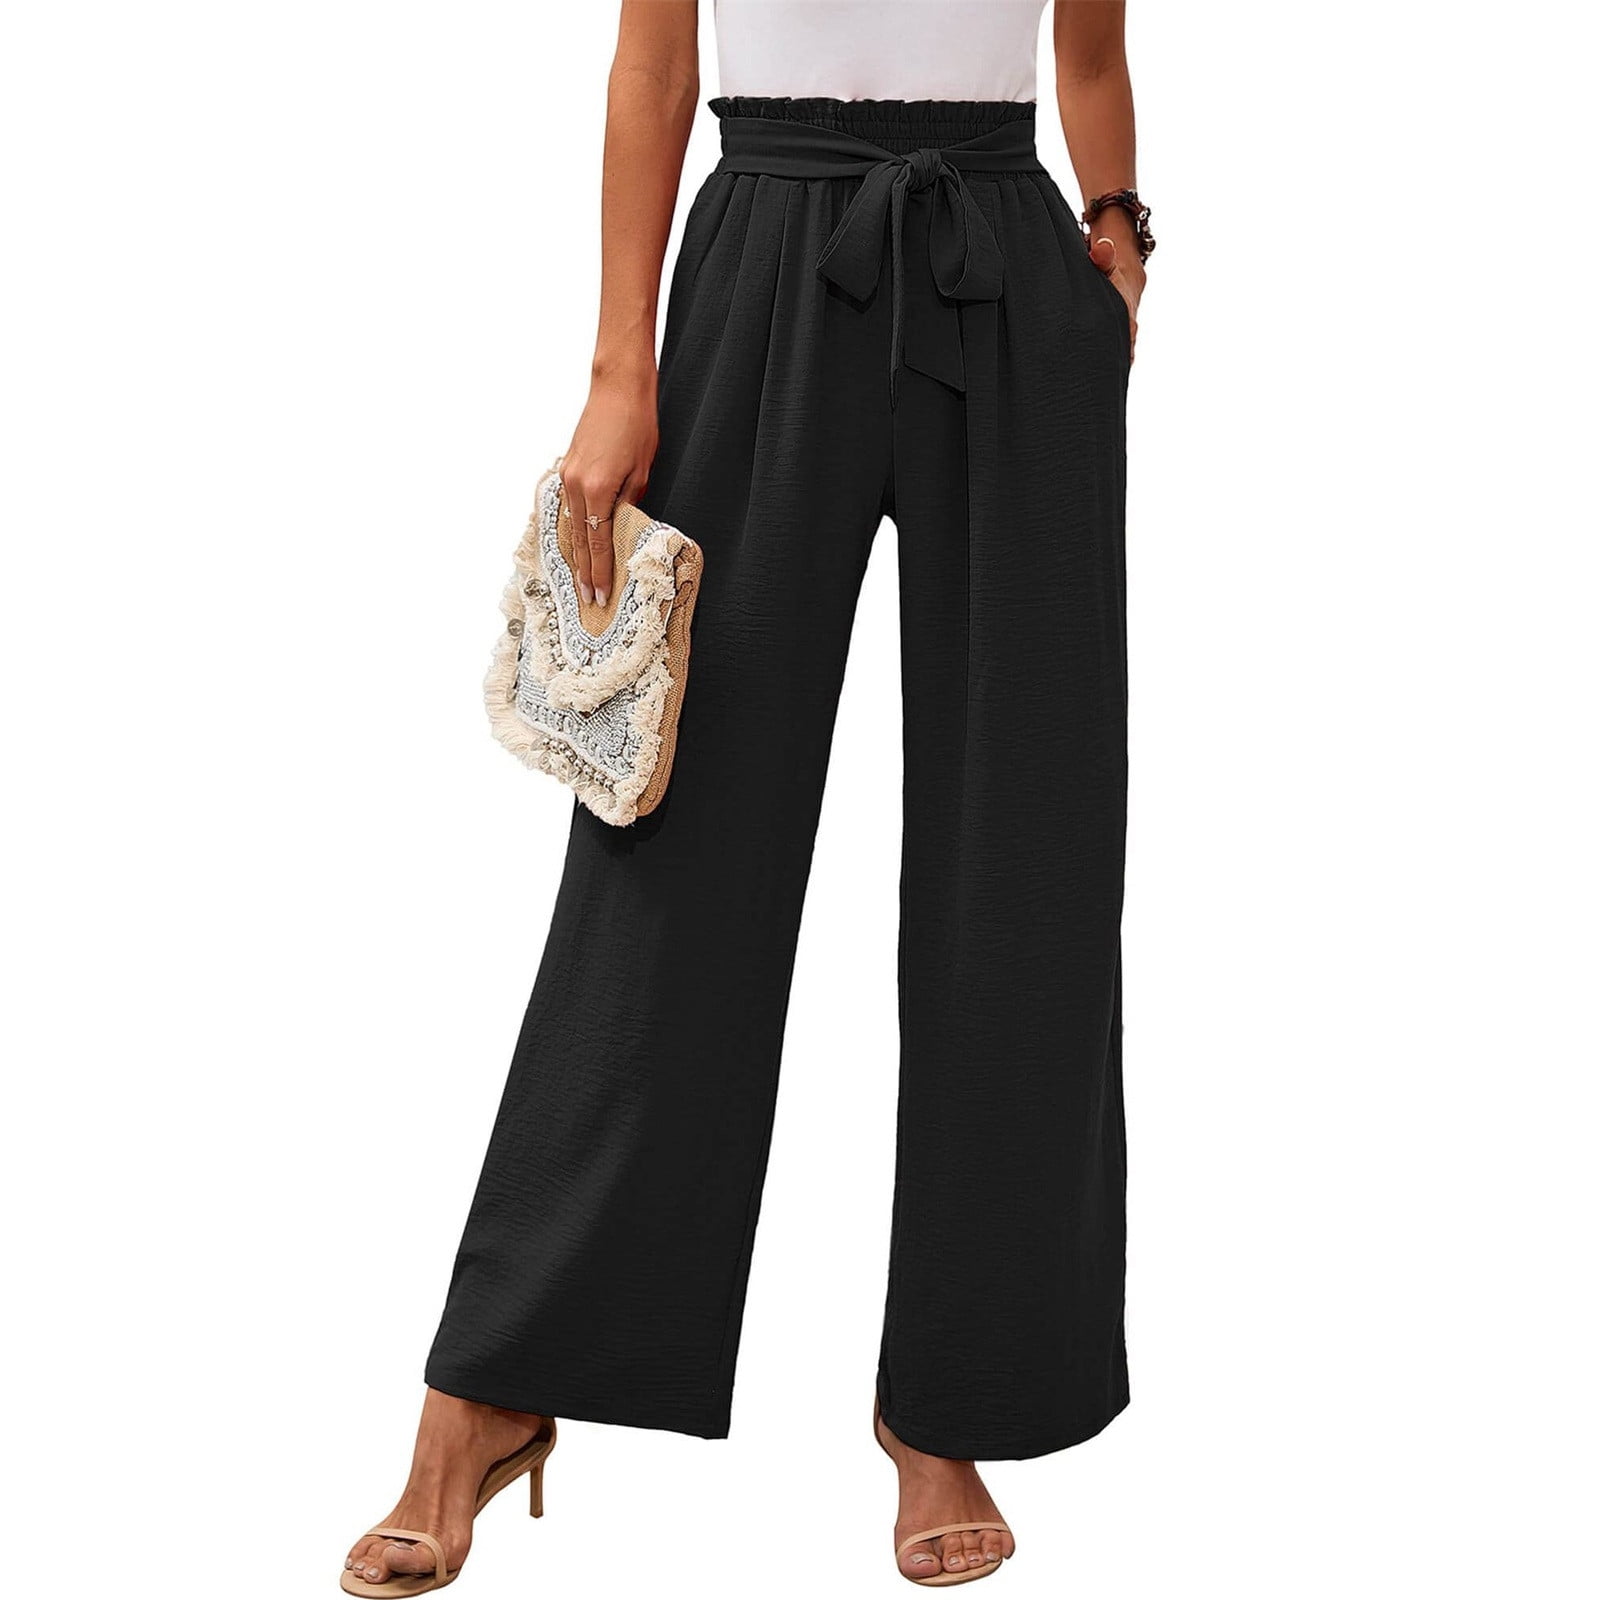 HIMIWAY Women's Wide Leg Pants With Pockets Lightweight High Waisted ...